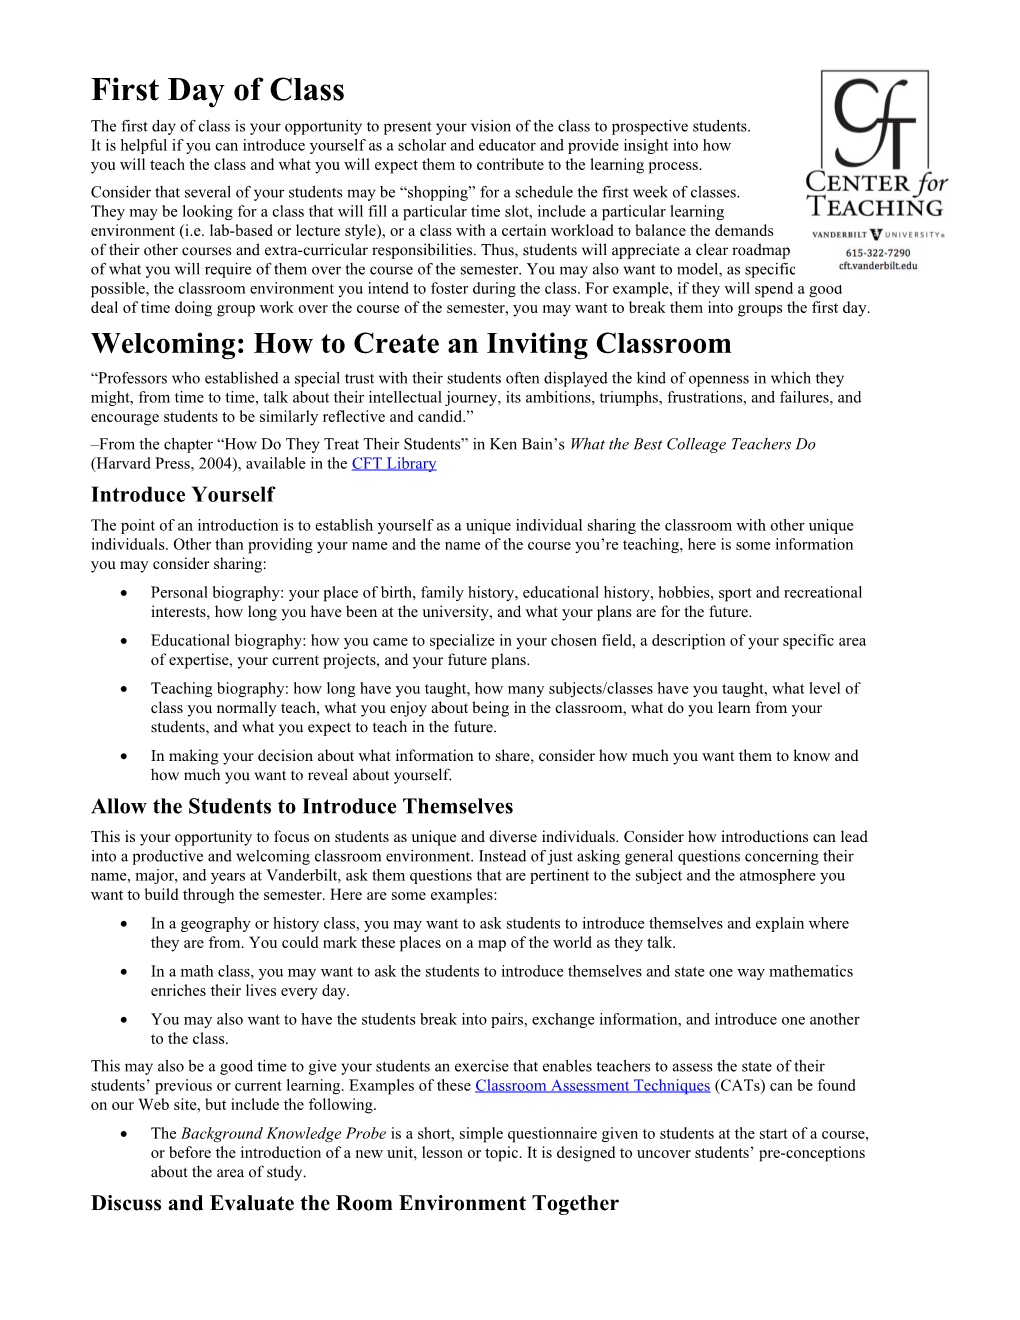 Welcoming: How to Create an Inviting Classroom